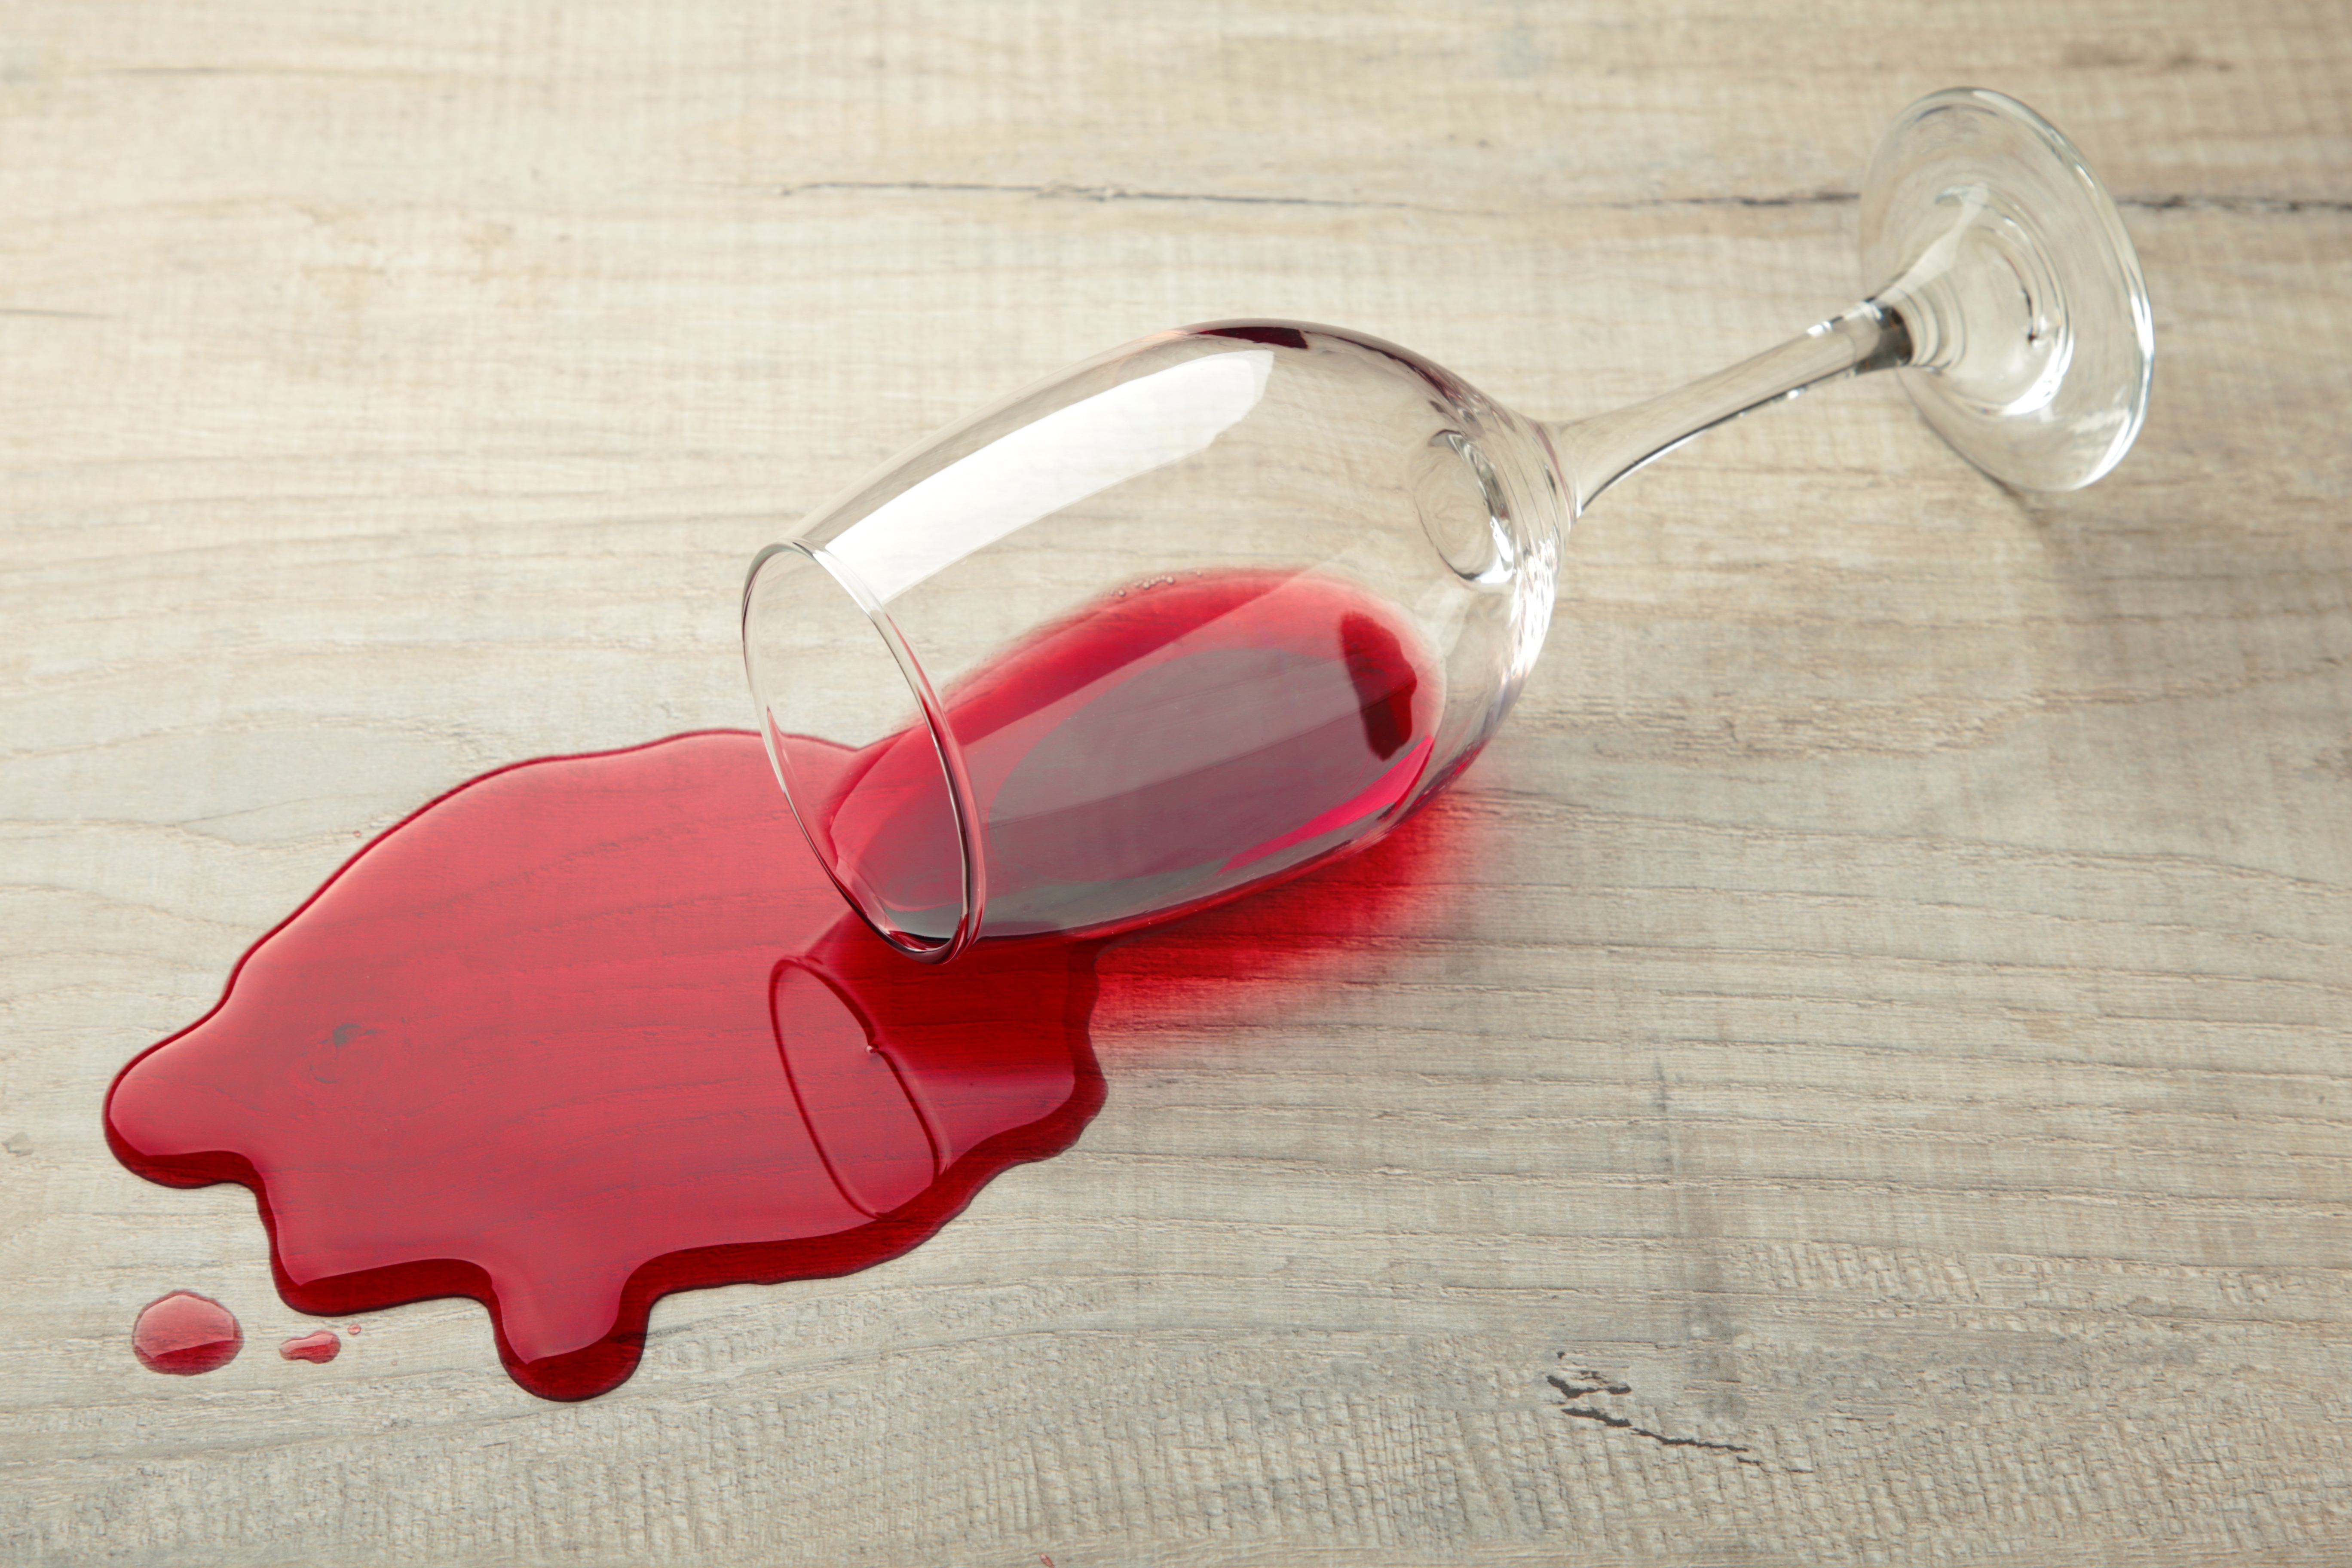 Glass of red wine fell on laminate, wine spilled on floor. | Source: Shutterstock